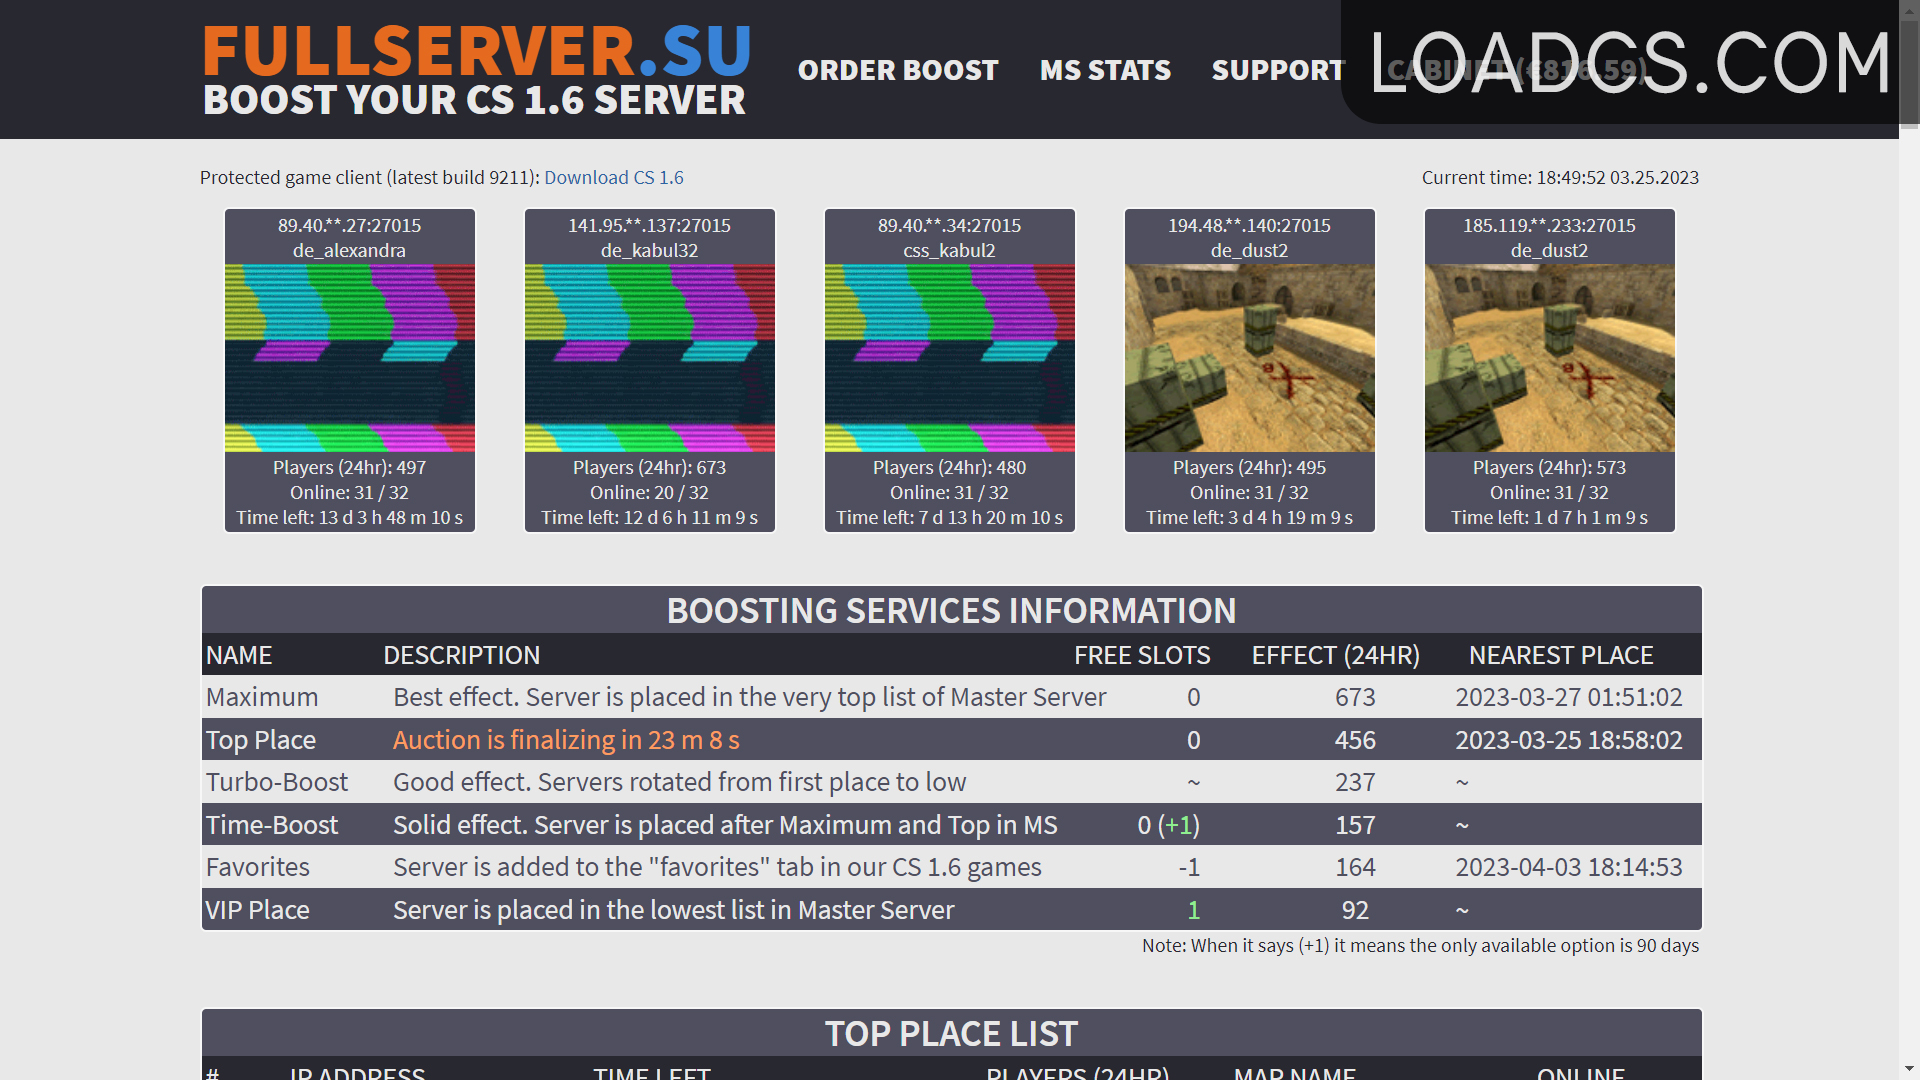 How to boost a Counter-Strike 1.6 server